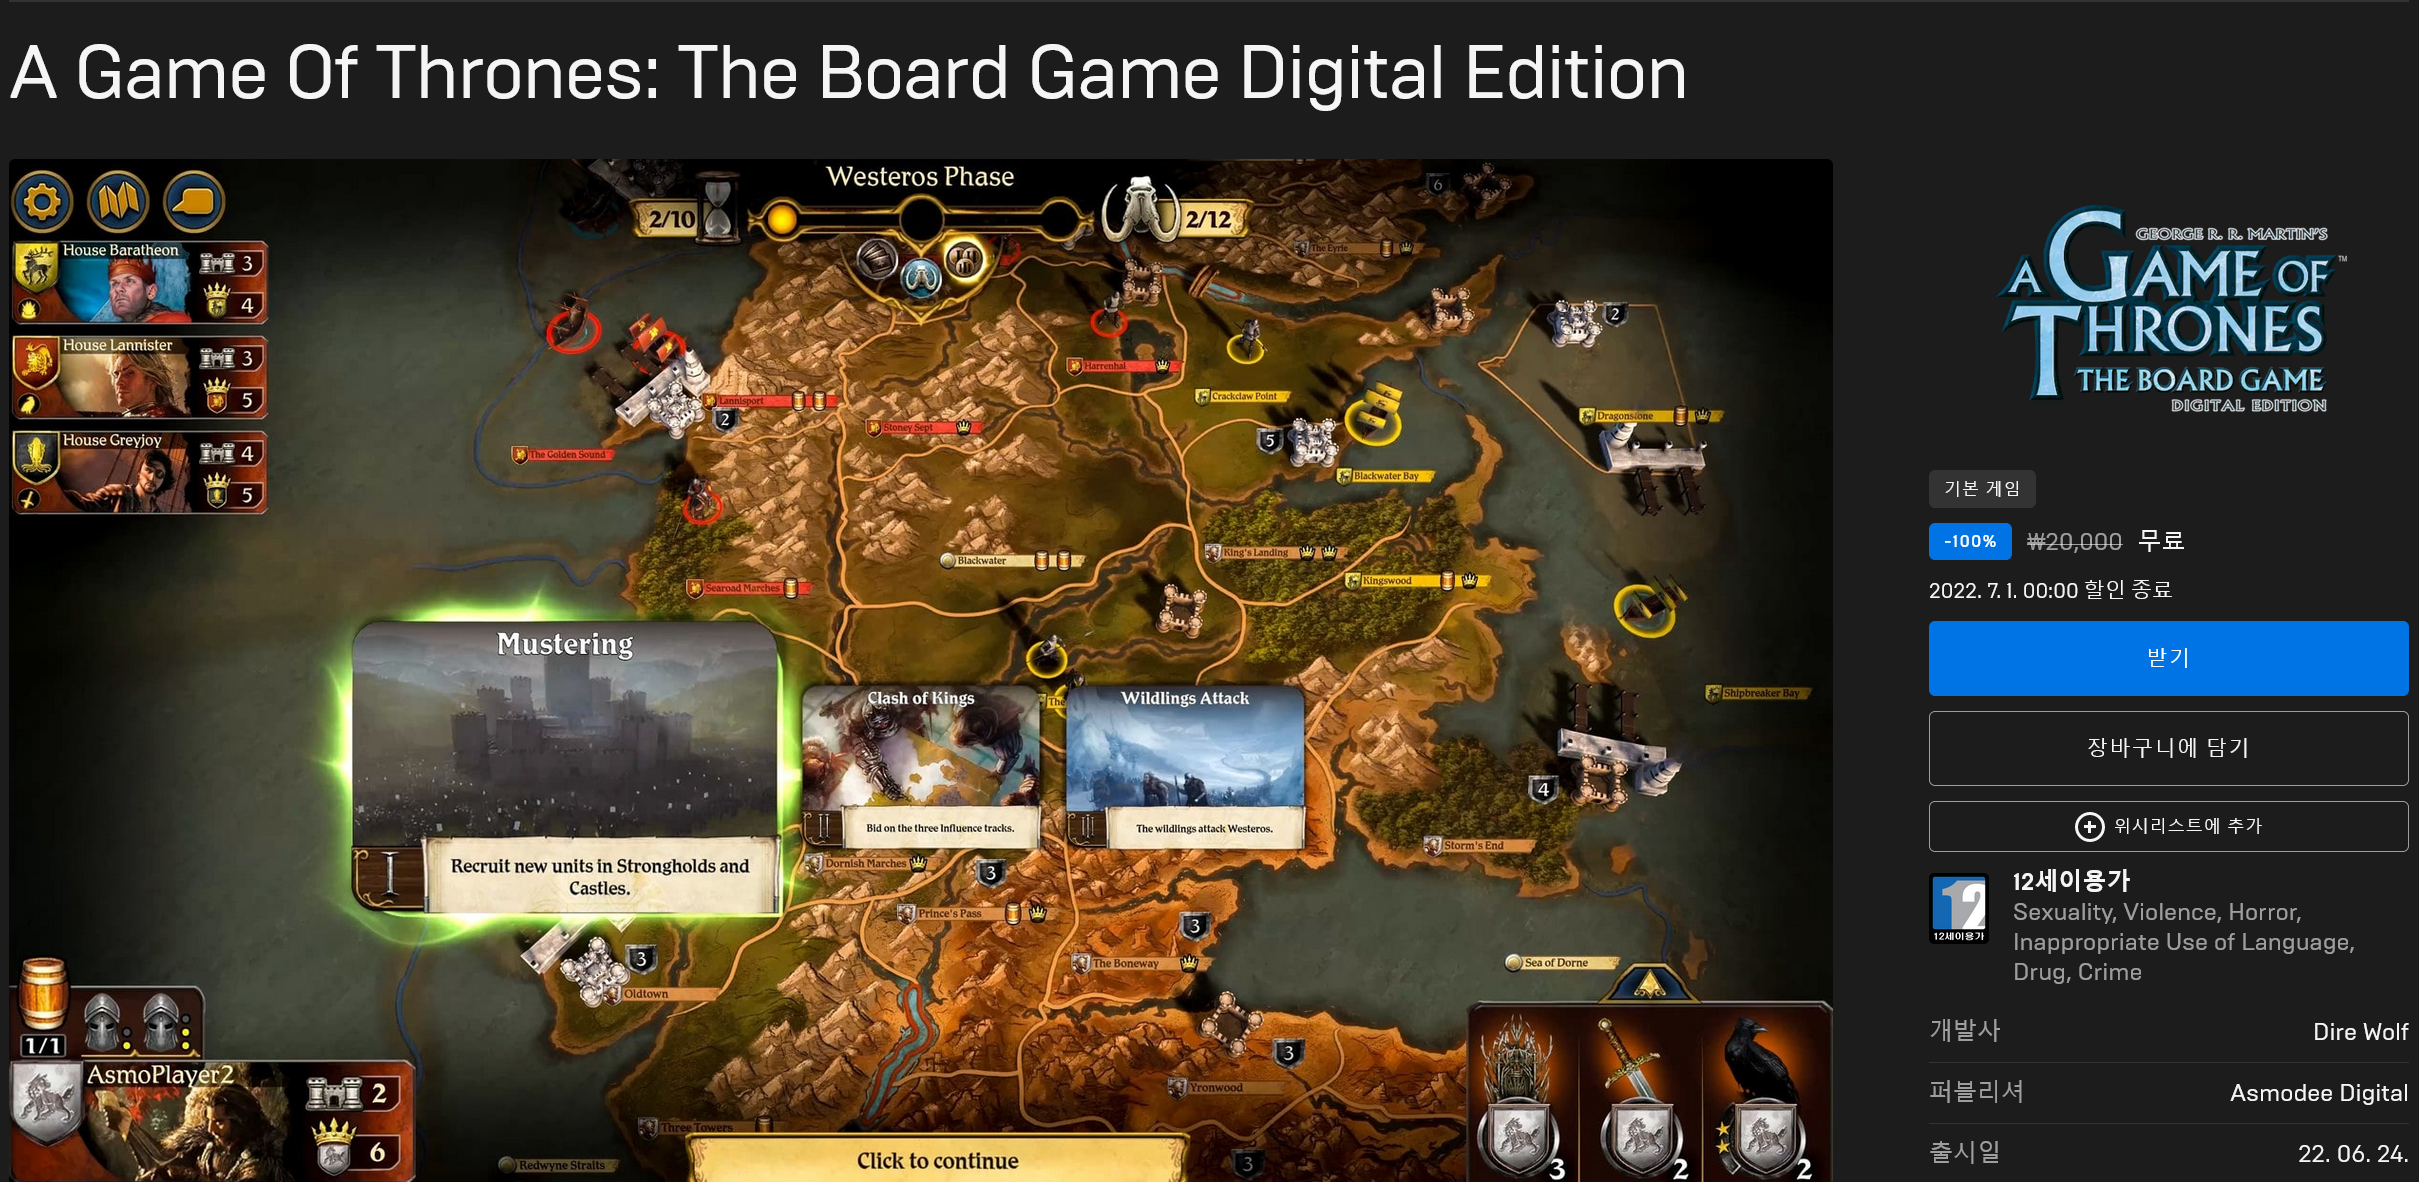 Screenshot 2022-06-24 at 00-34-04 A Game Of Thrones The Board Game Digital Edition 오늘 다운로드 및 구매 - Epic Games Store.png